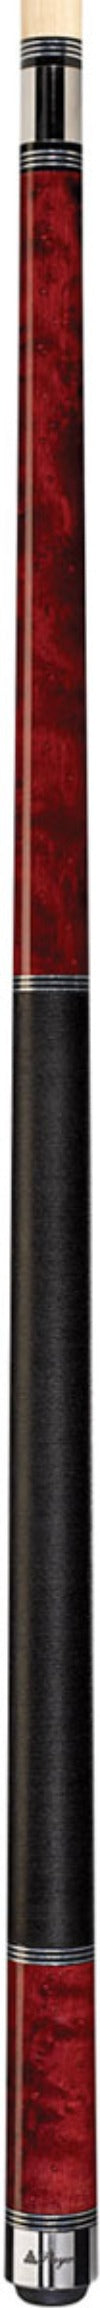 Players C-960 Pool Cue -Players